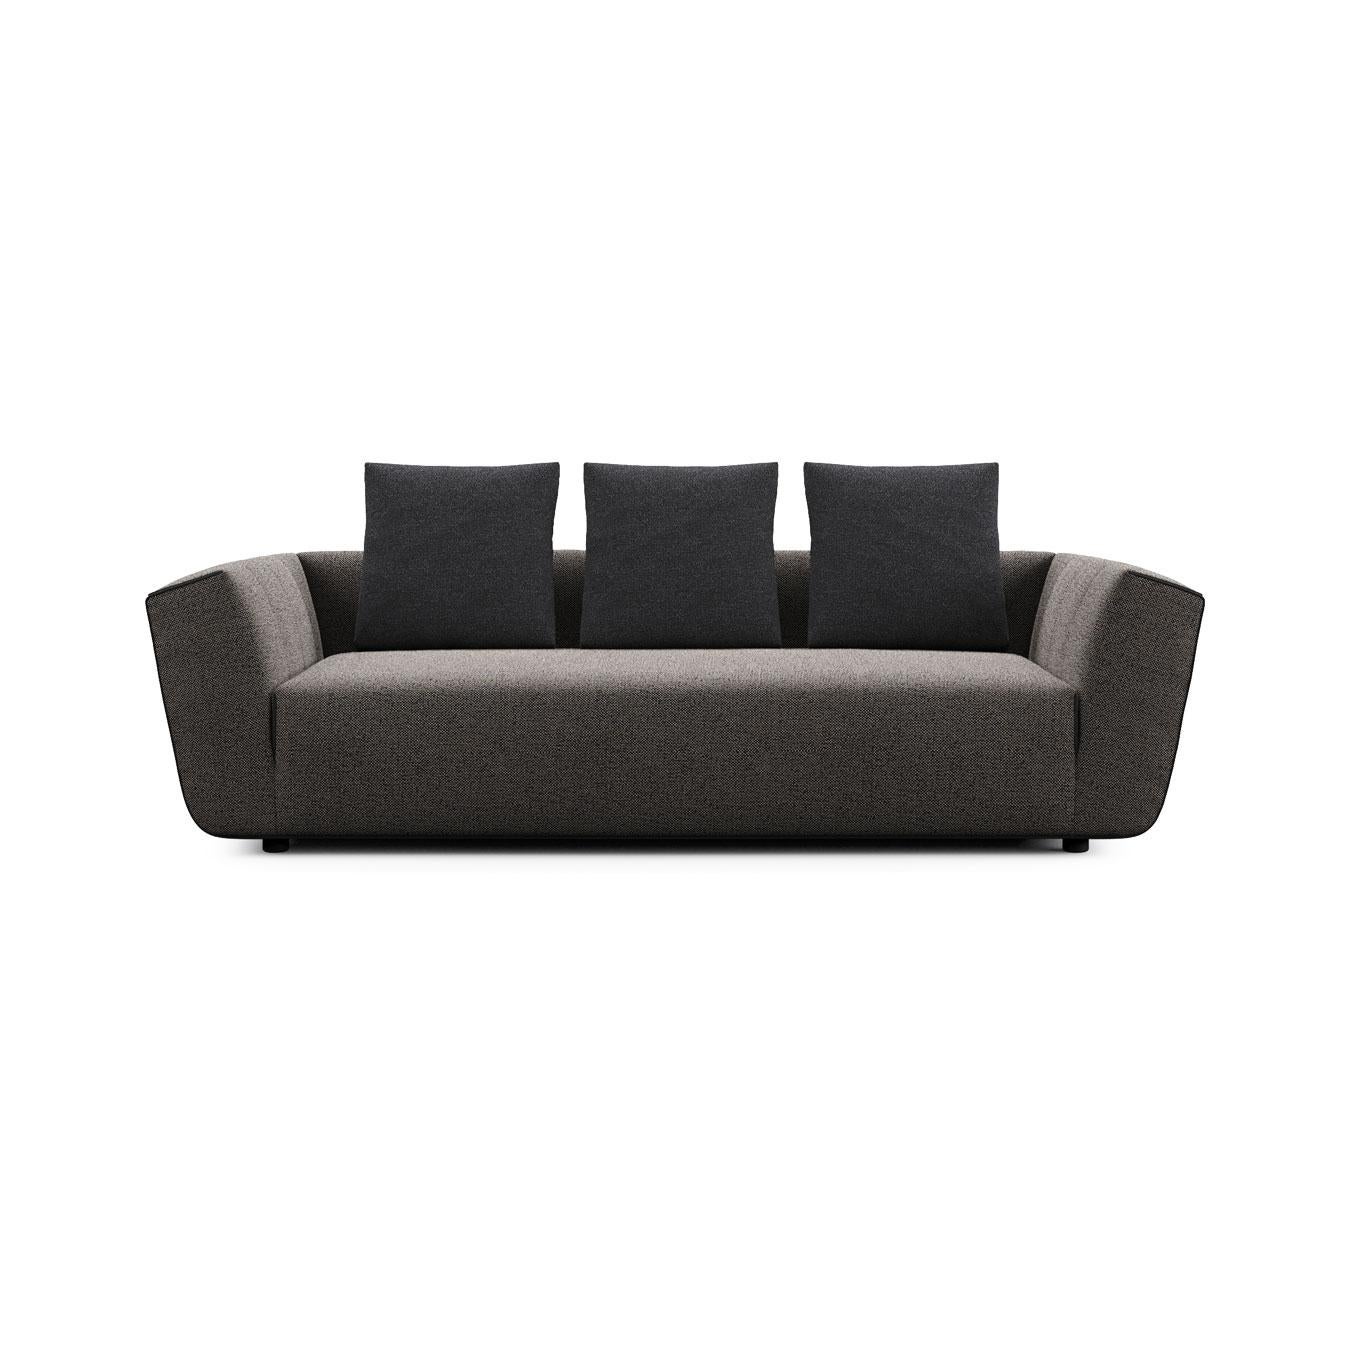 Each module has a customizable thread that gives it elegance.

Characterized by extraordinary Comfort, and great style, it fits perfectly into various eclectic and multifunctional environments.

Dolce Vita is based on the classic sectional sofa,